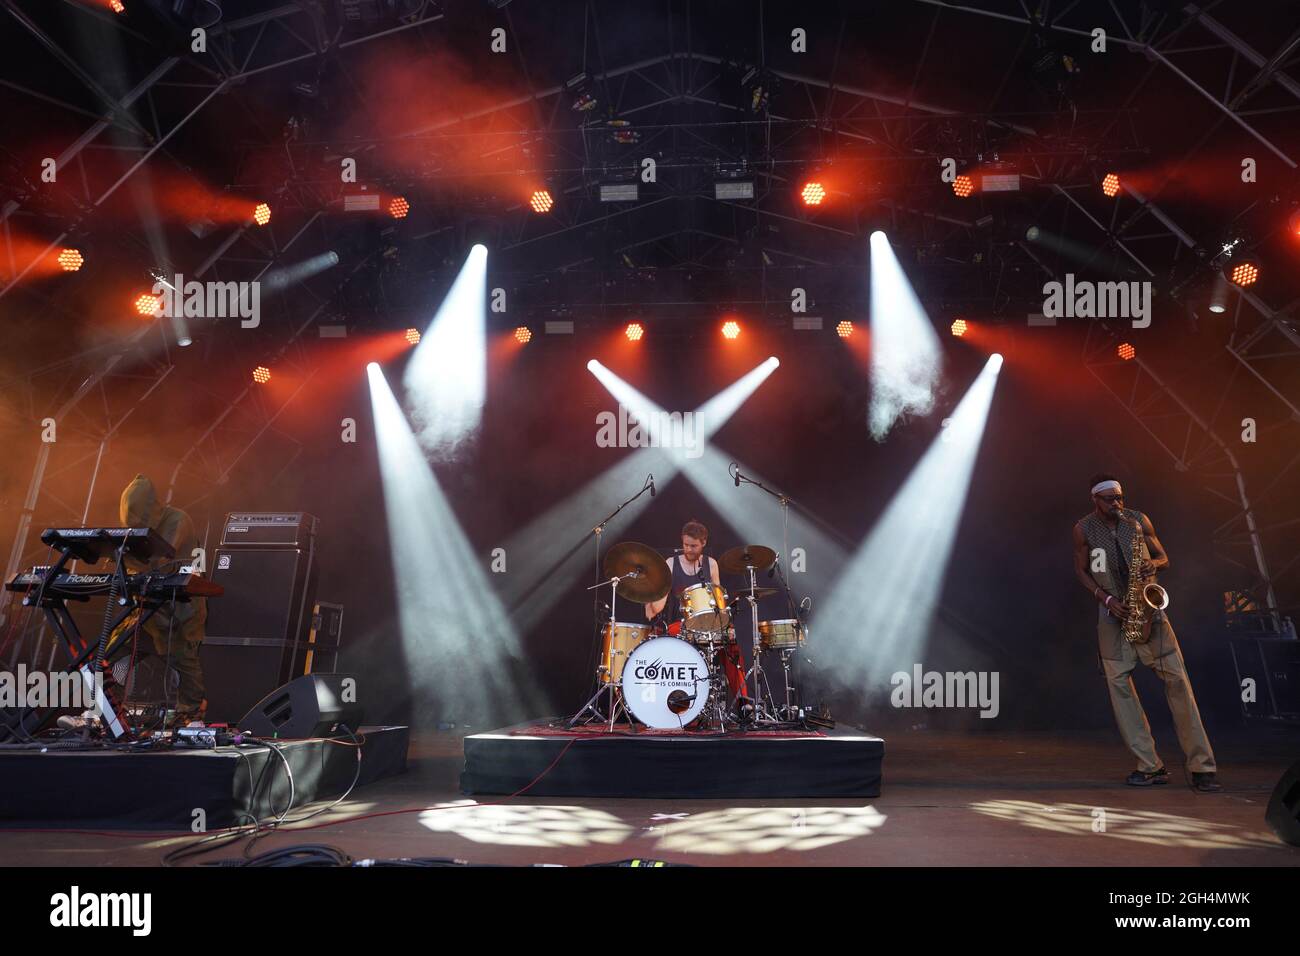 Dorset, UK. September 5th, 2021. The Comet is Coming performing at the 2021 End of the Road Festival in Larmer Tree Gardens in Dorset. Photo: Richard Gray/Alamy Stock Photo